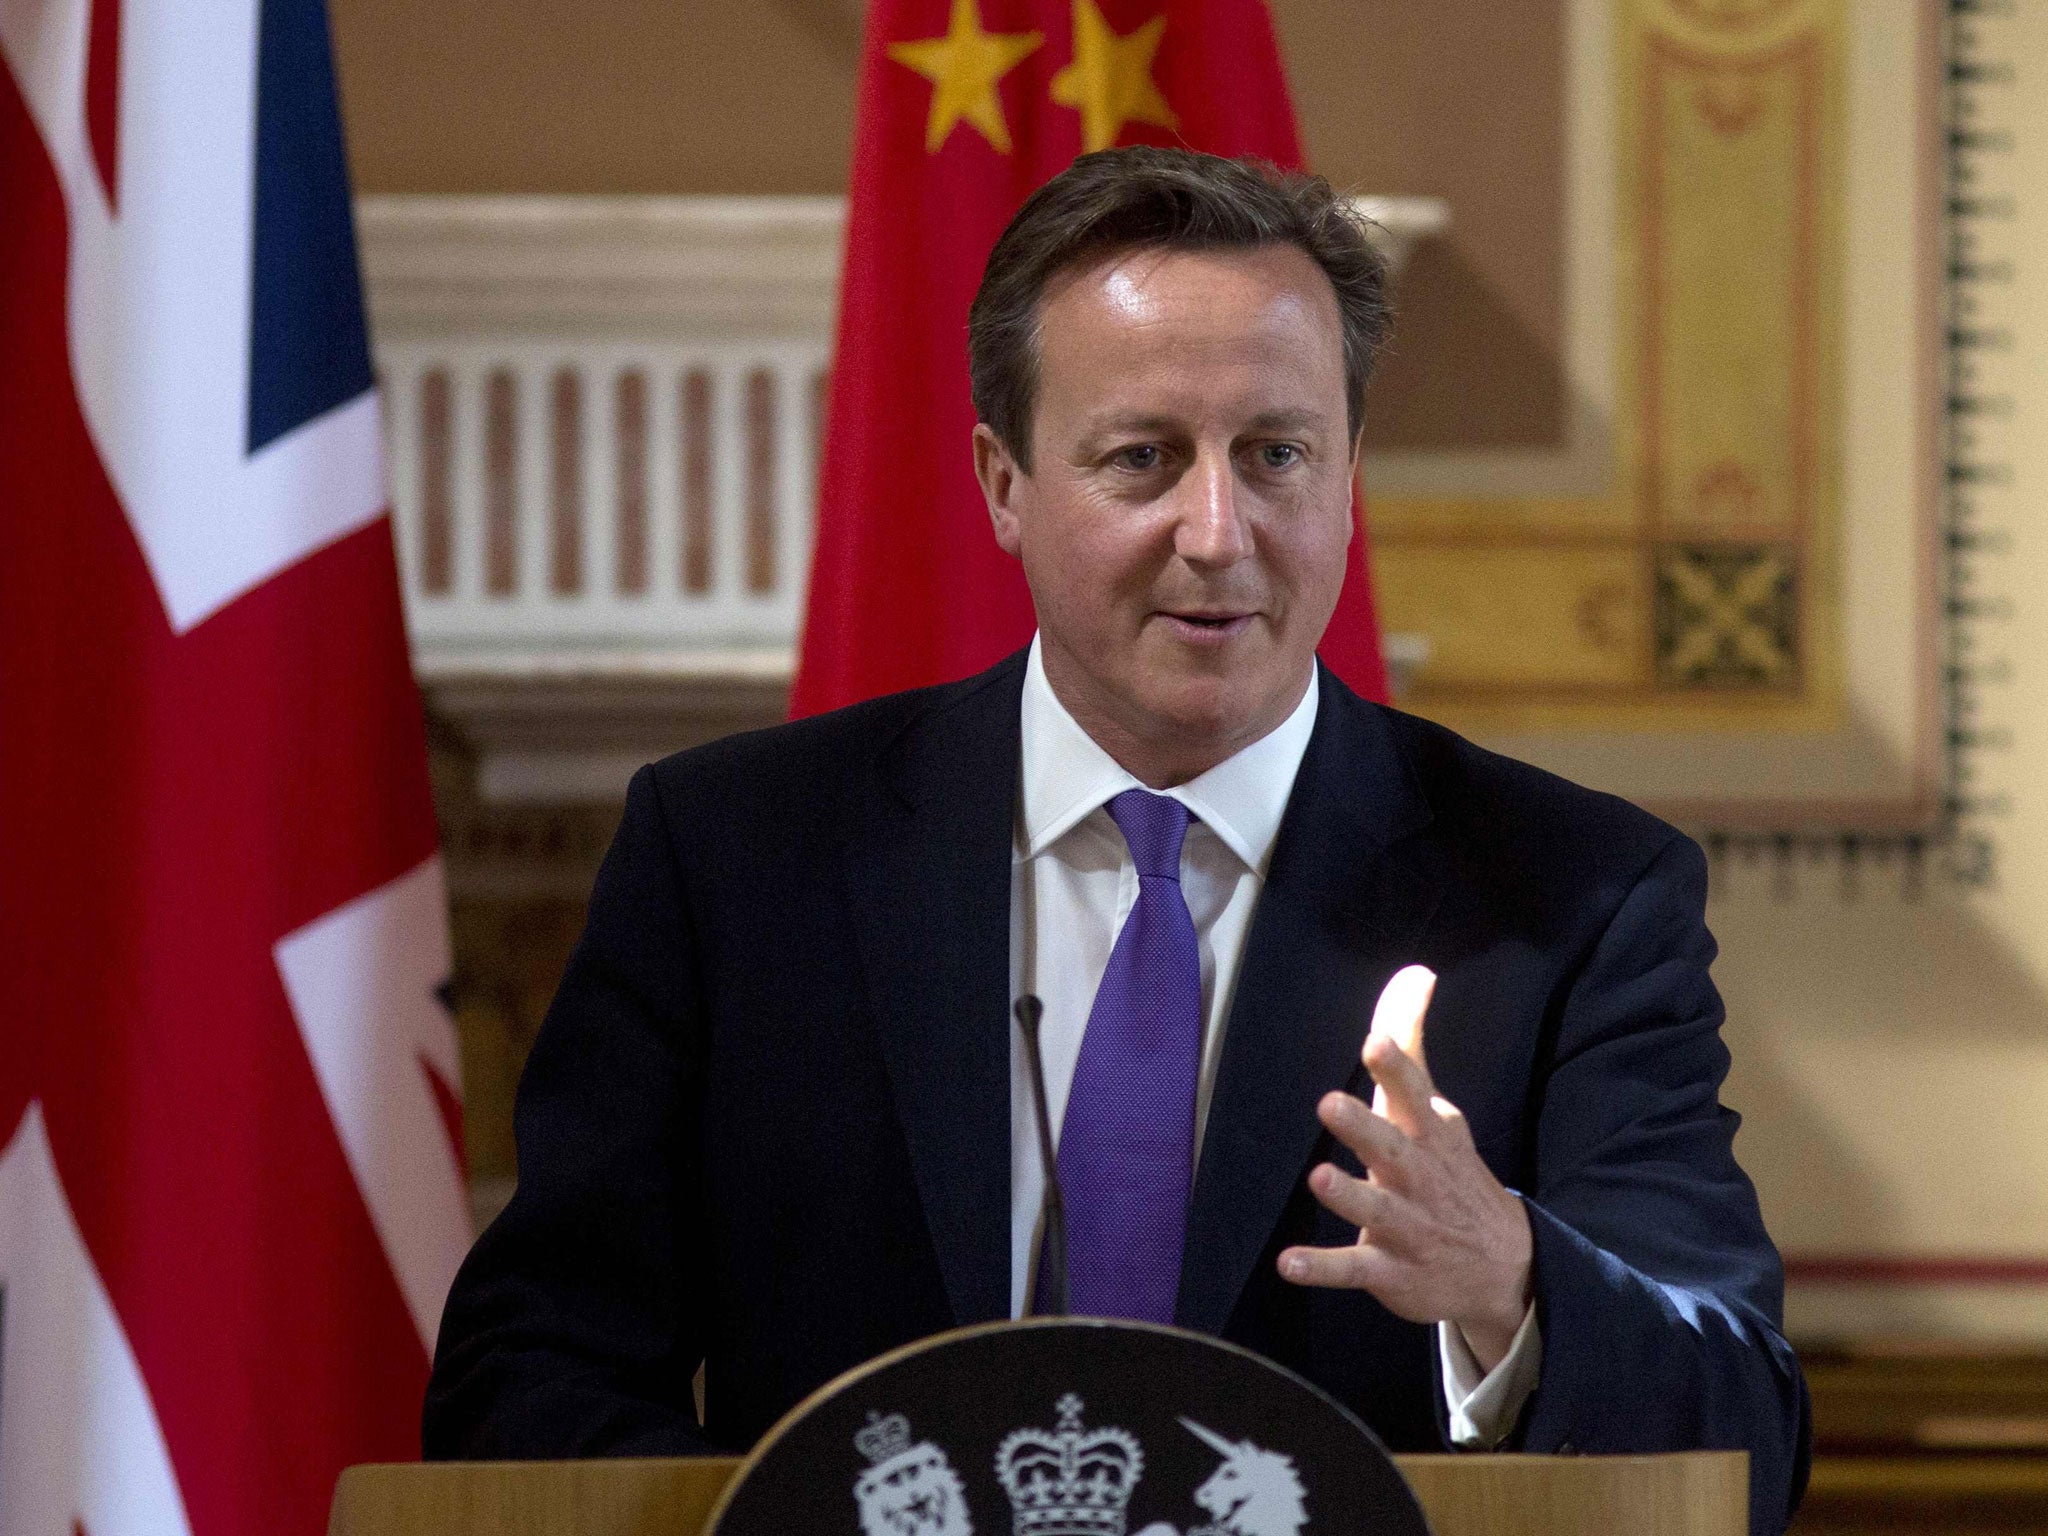 Prime Minister David Cameron speaks during a news conference in London 17 June, 2014